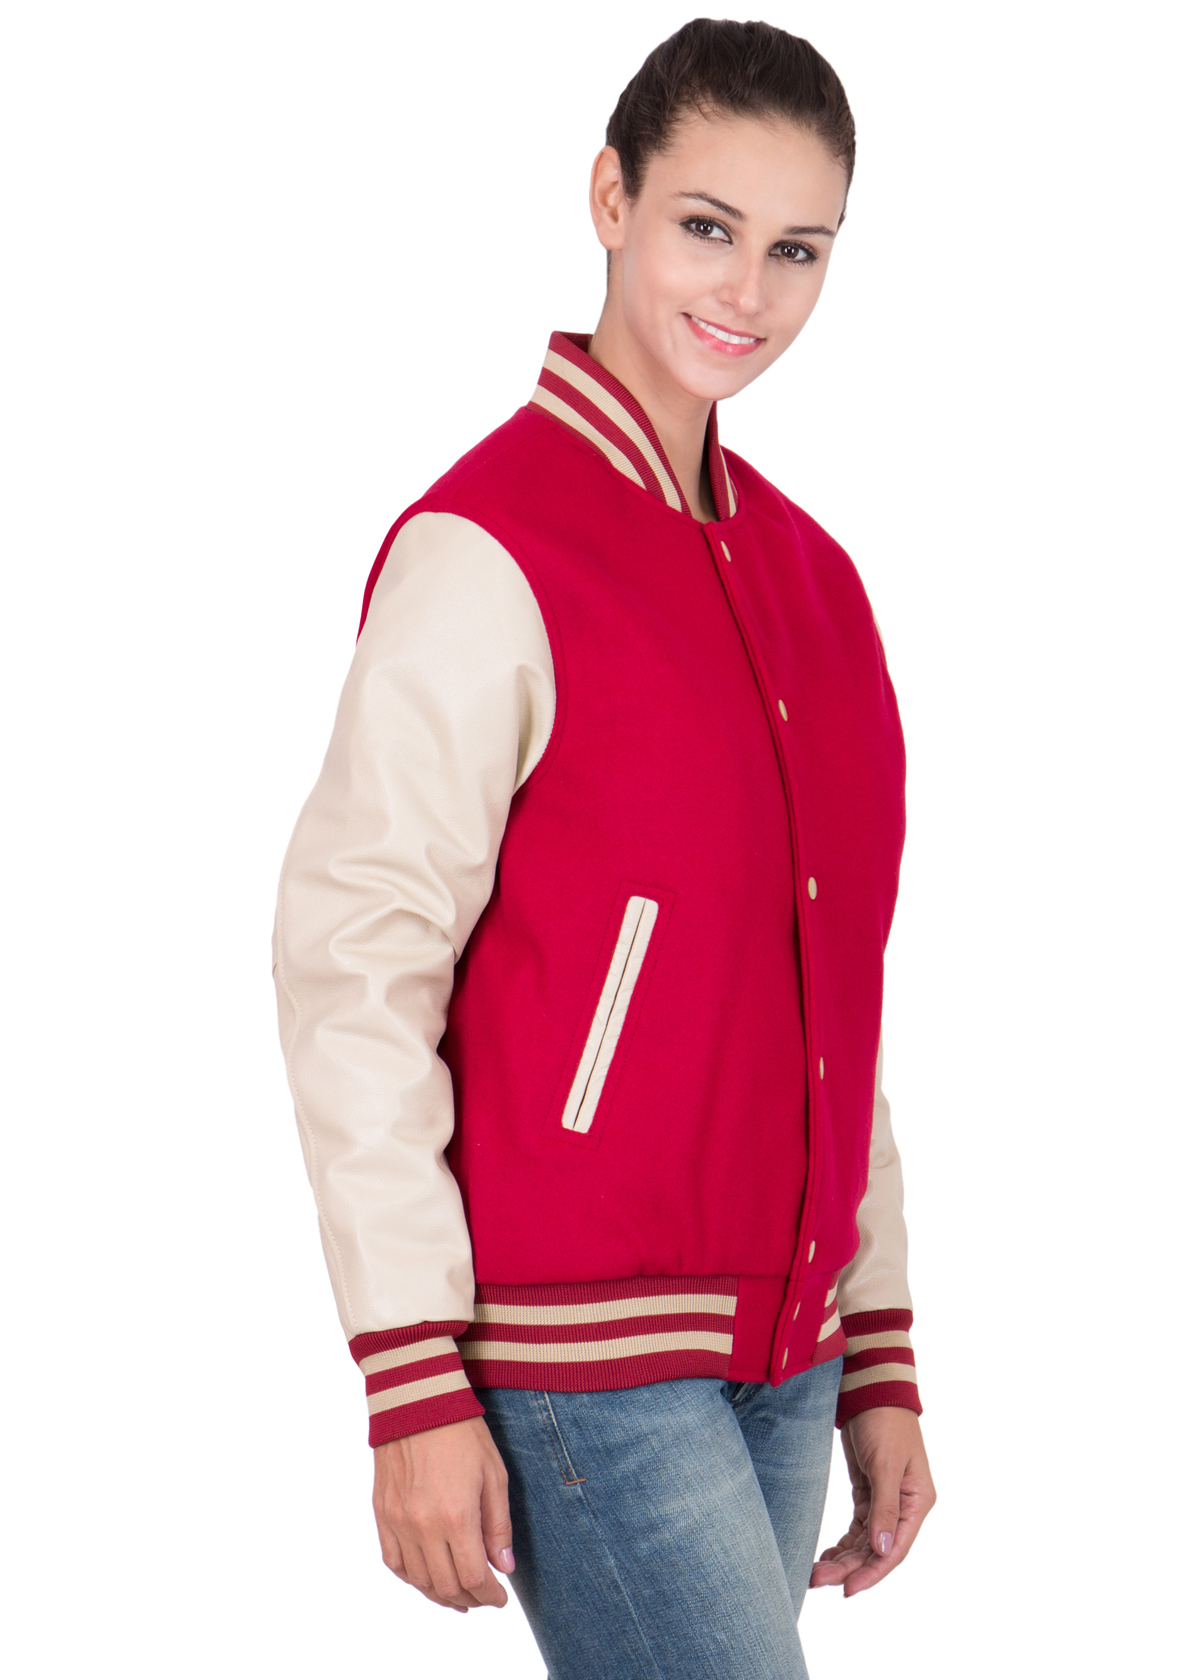 PARCHMENT LEATHER SLEEVES & SCARLET RED WOOL BODY VARSITY JACKET-WOMEN ...